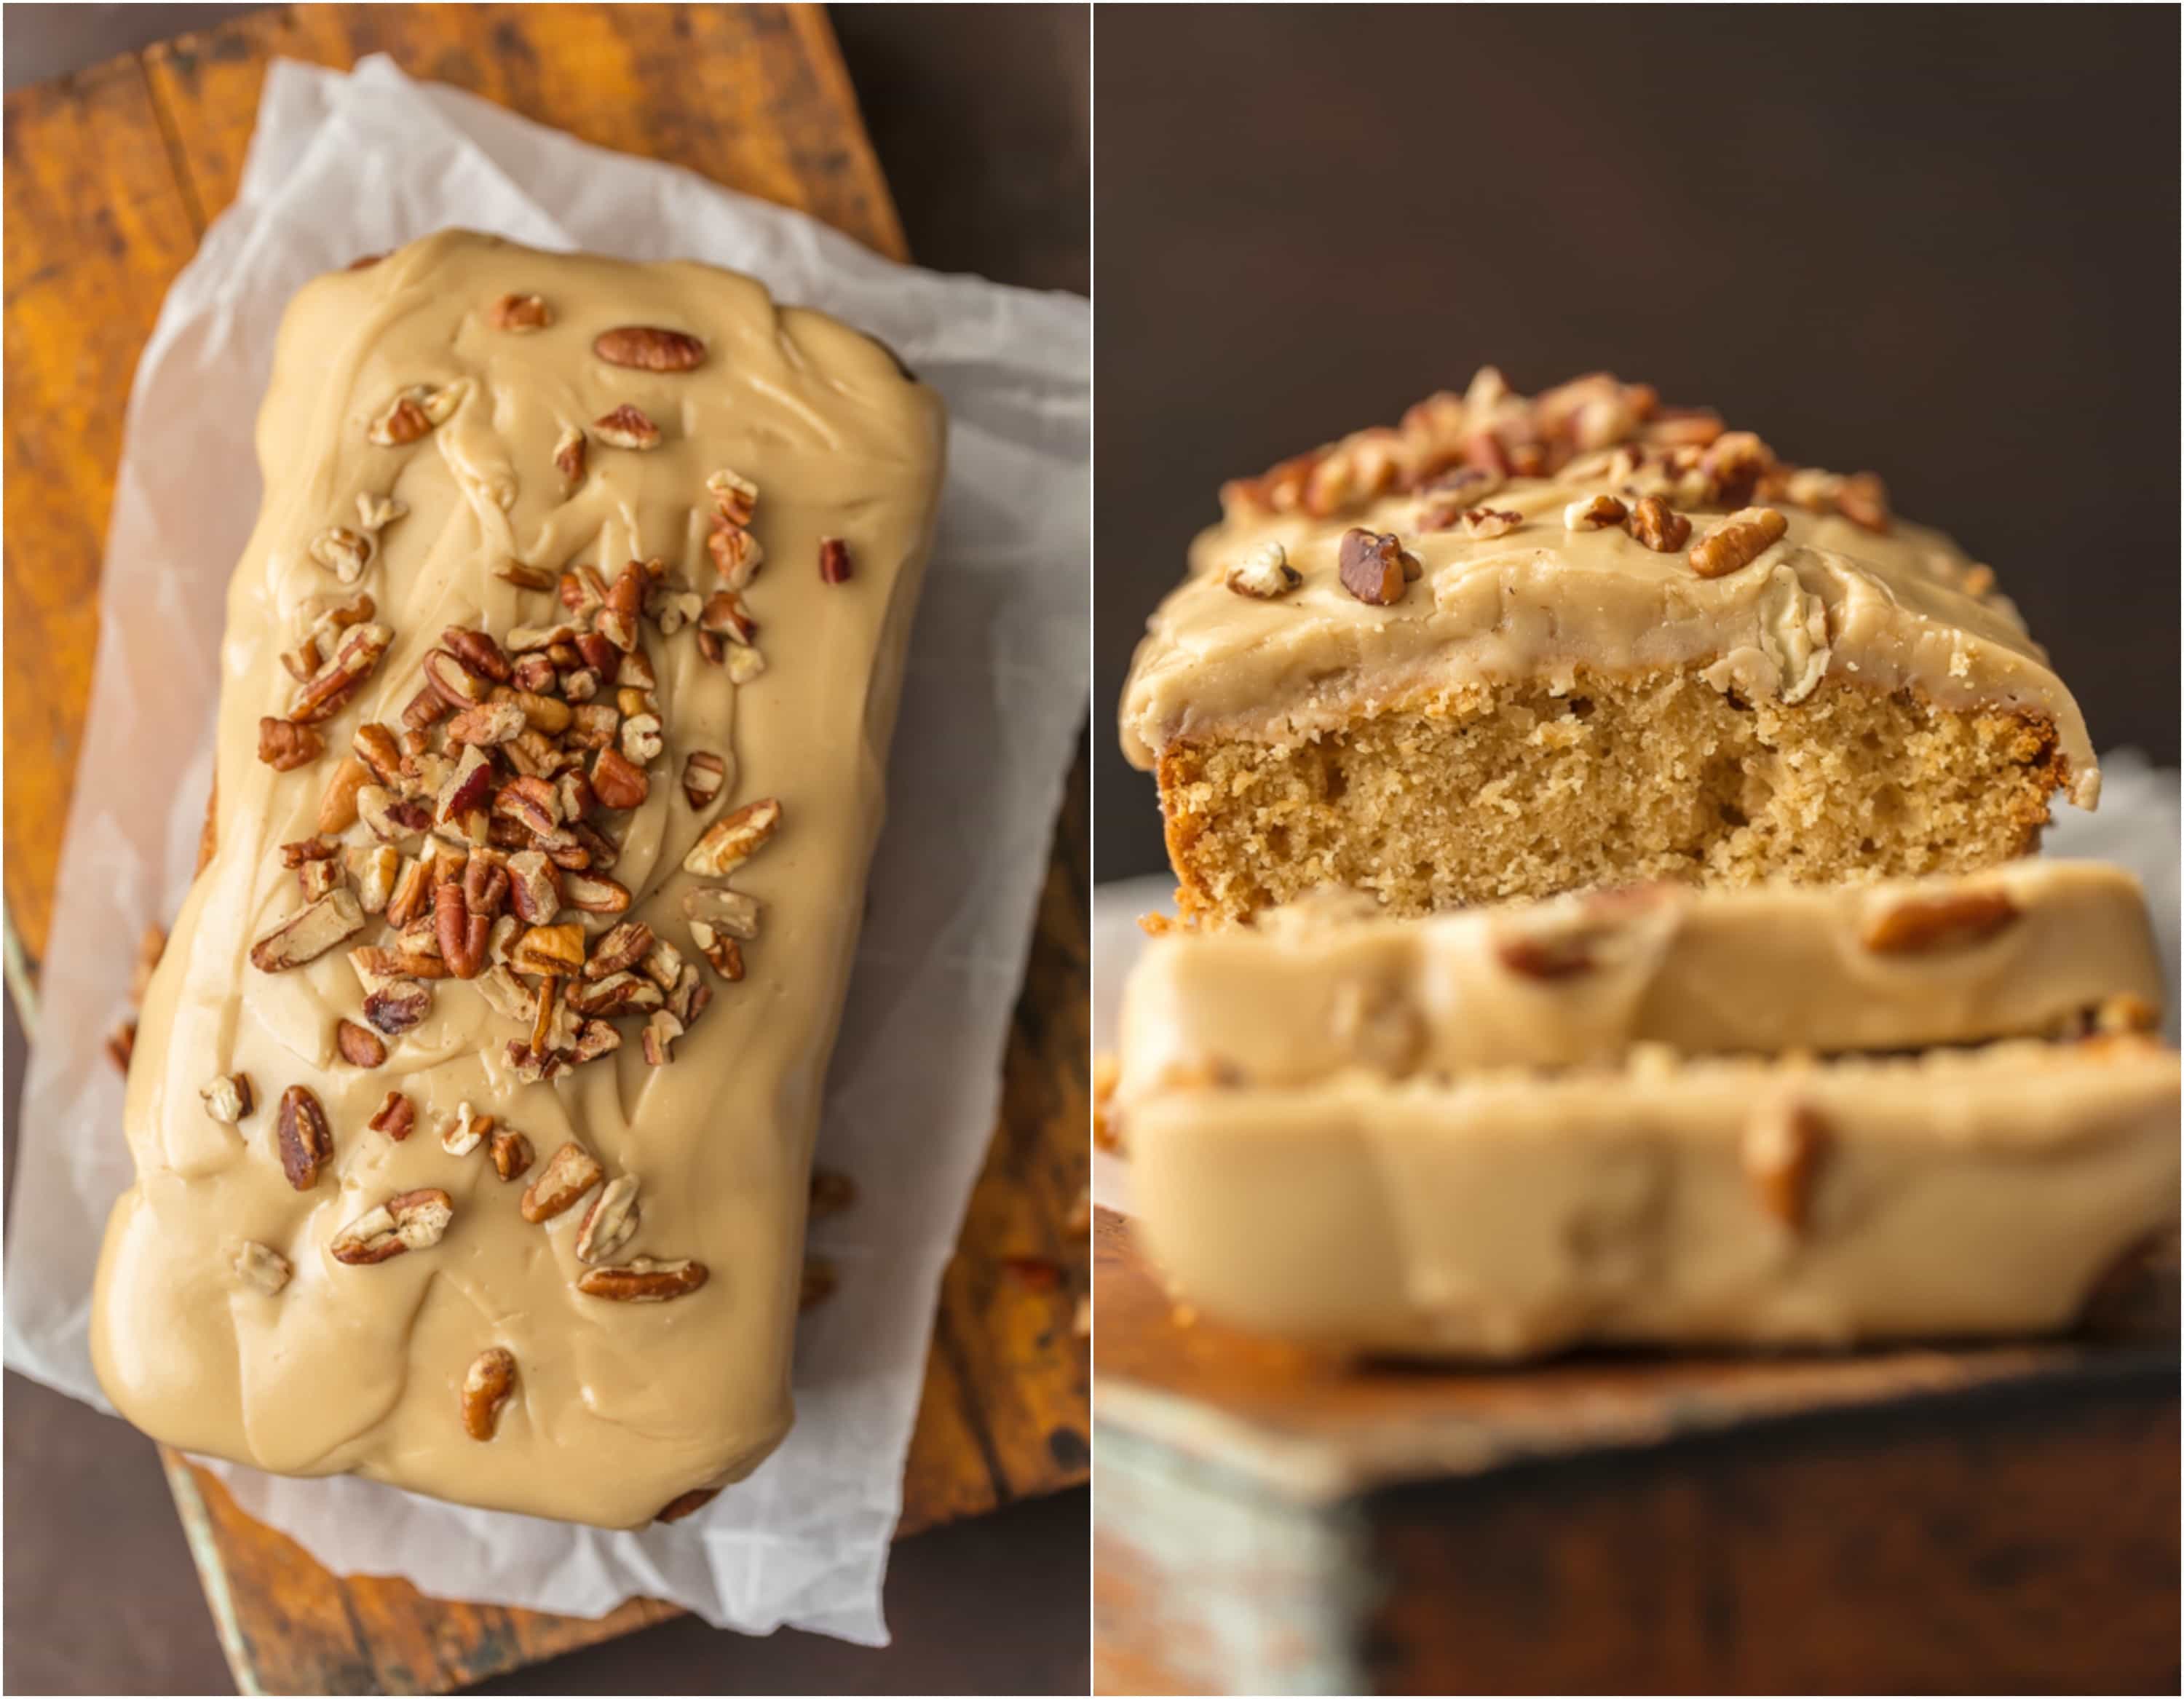 This BROWN SUGAR POUND CAKE with BROWN SUGAR ICING (let's be honest, it's caramel) is utterly delicious and just perfect for Fall. A simple classic. The pecans add a little extra crunch to this sweet and amazing cake.